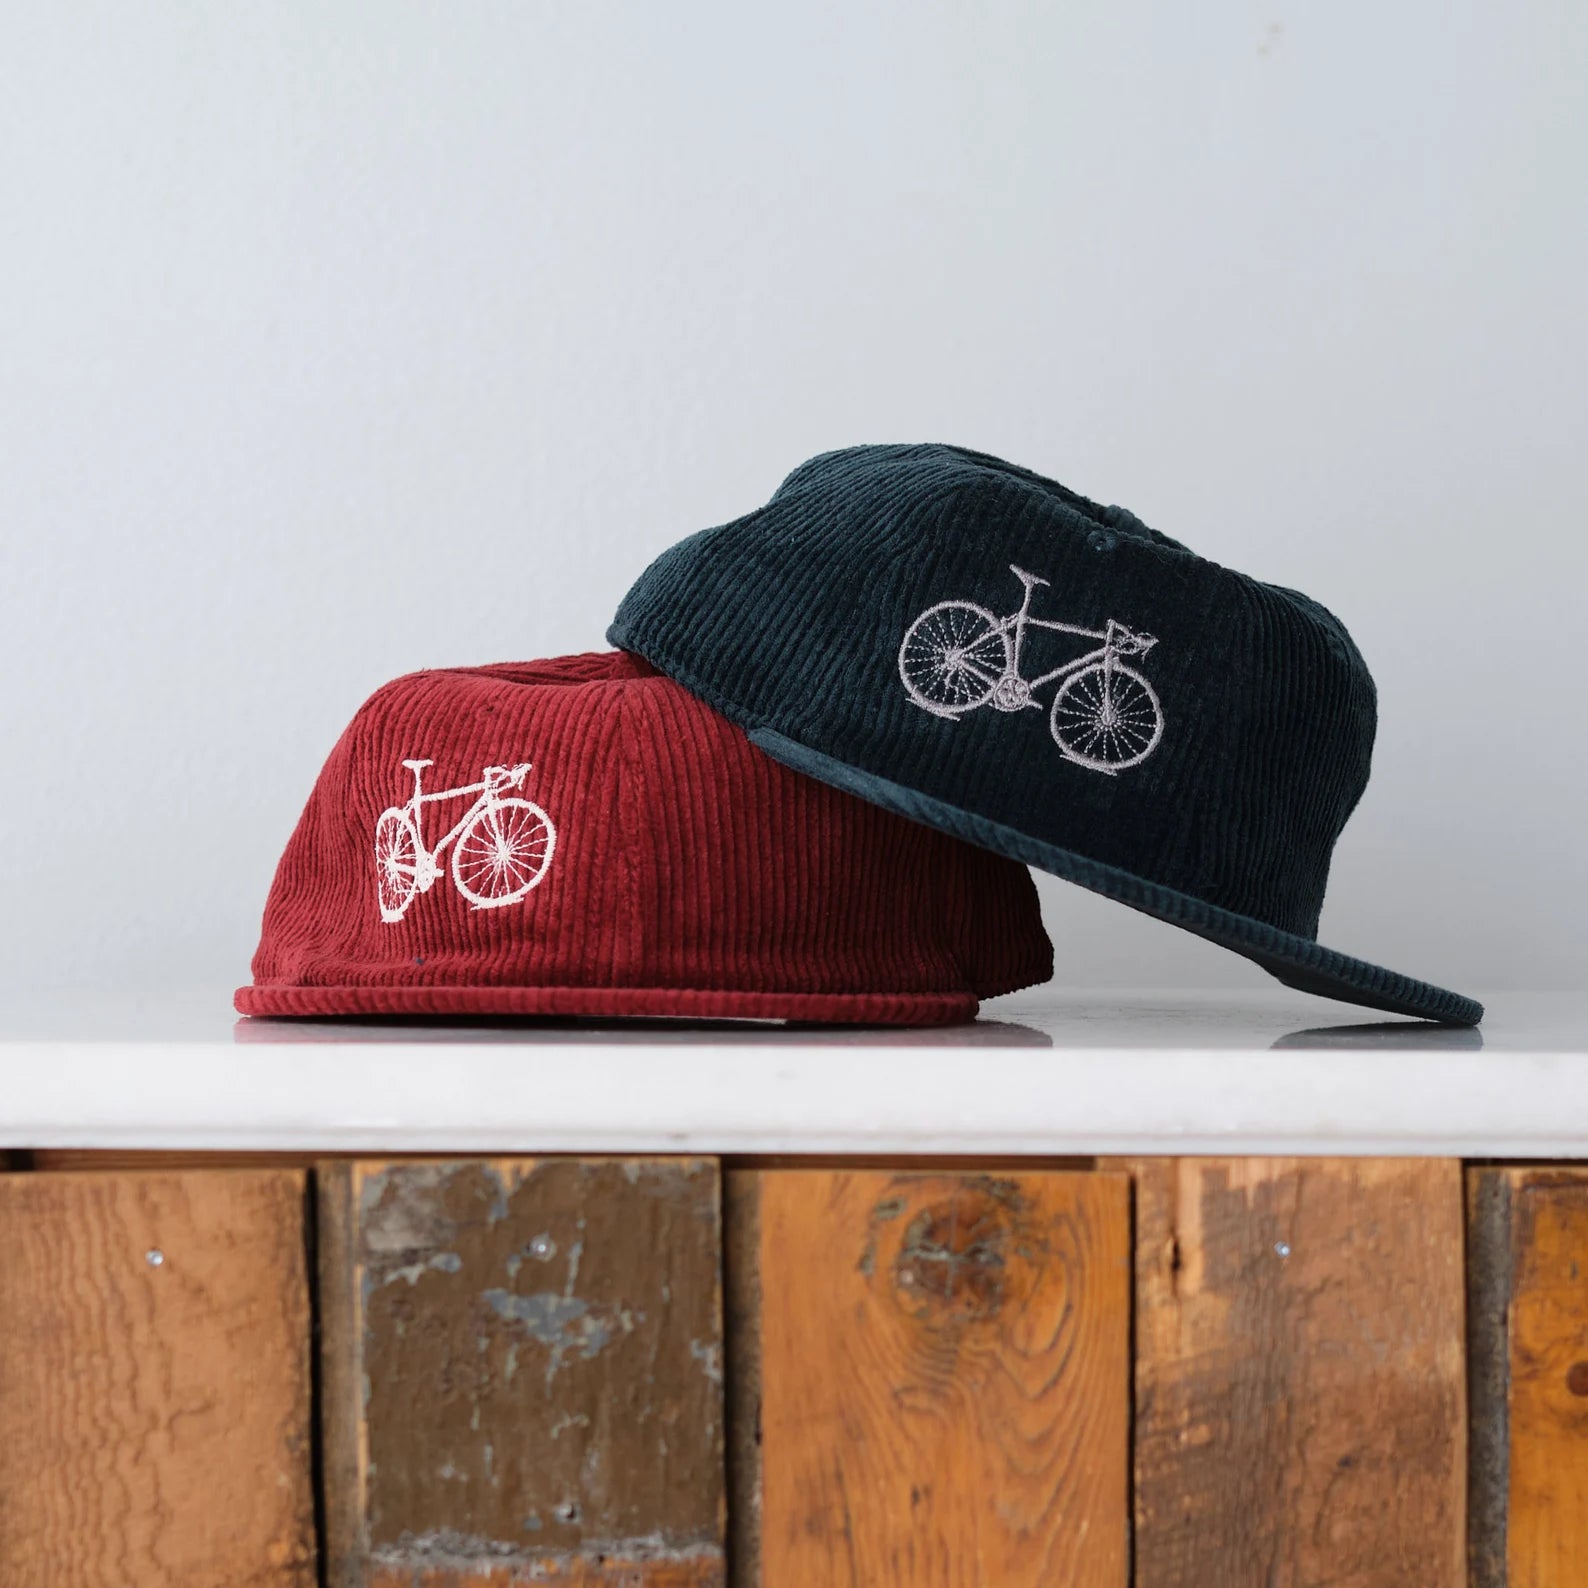 Bicycle embroidered Cord Cap, Adjustable and unstructured